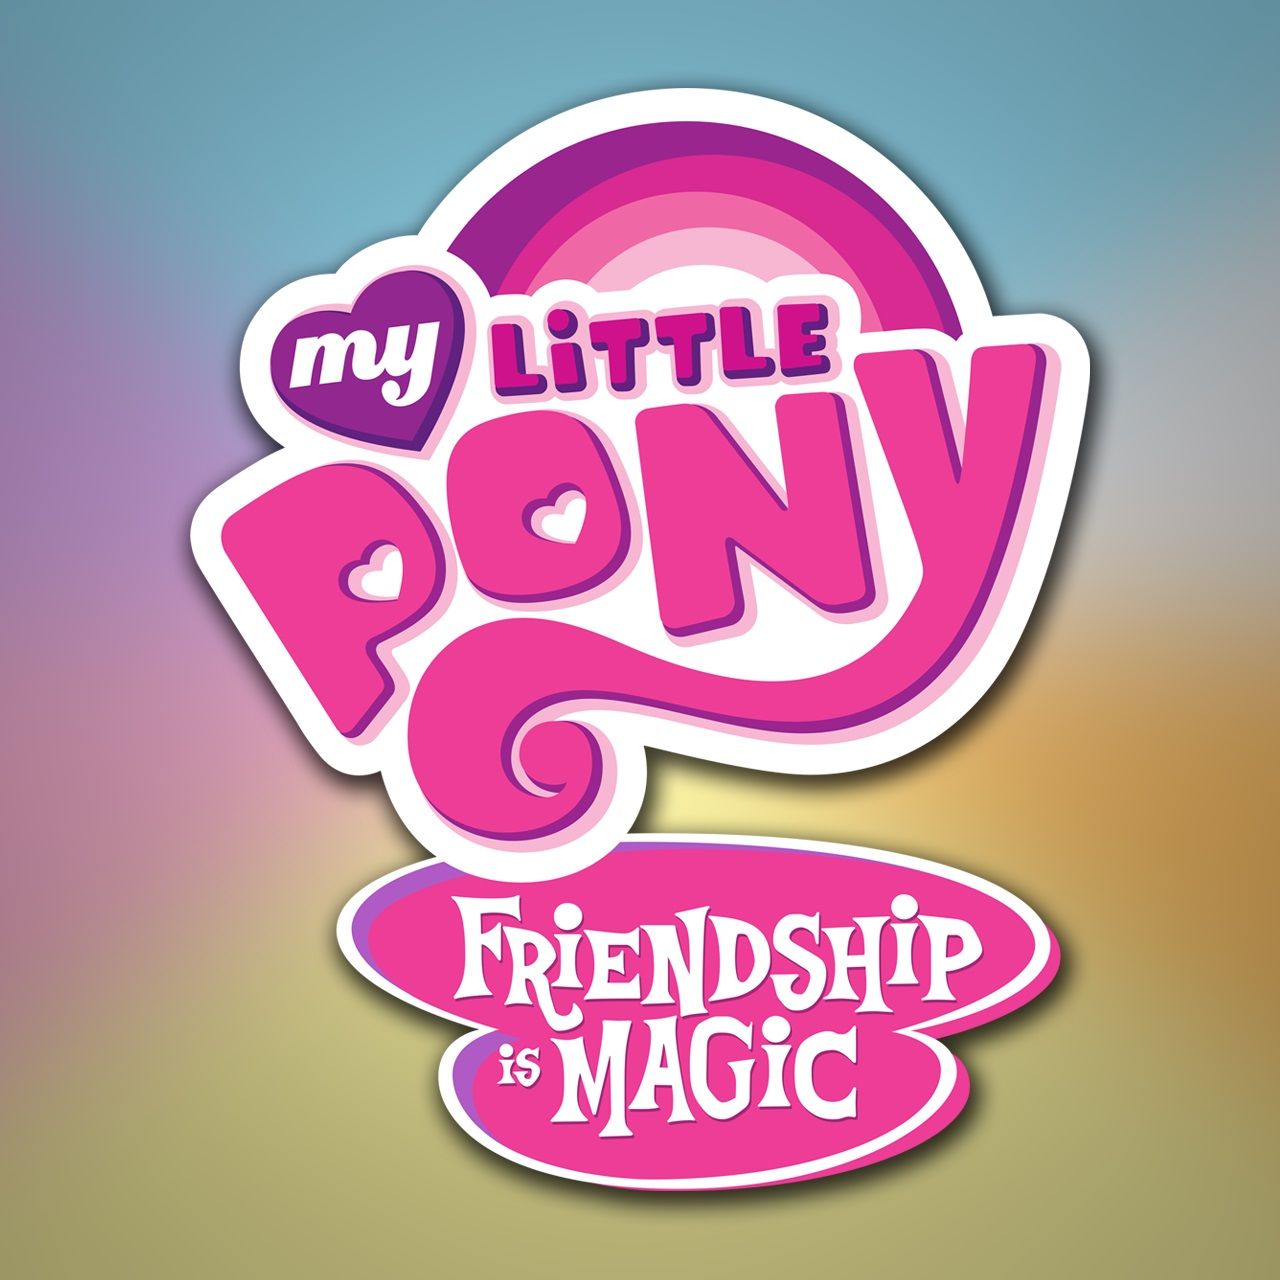 My Little Pony : Friendship is Magic Season 5 - In Our Town